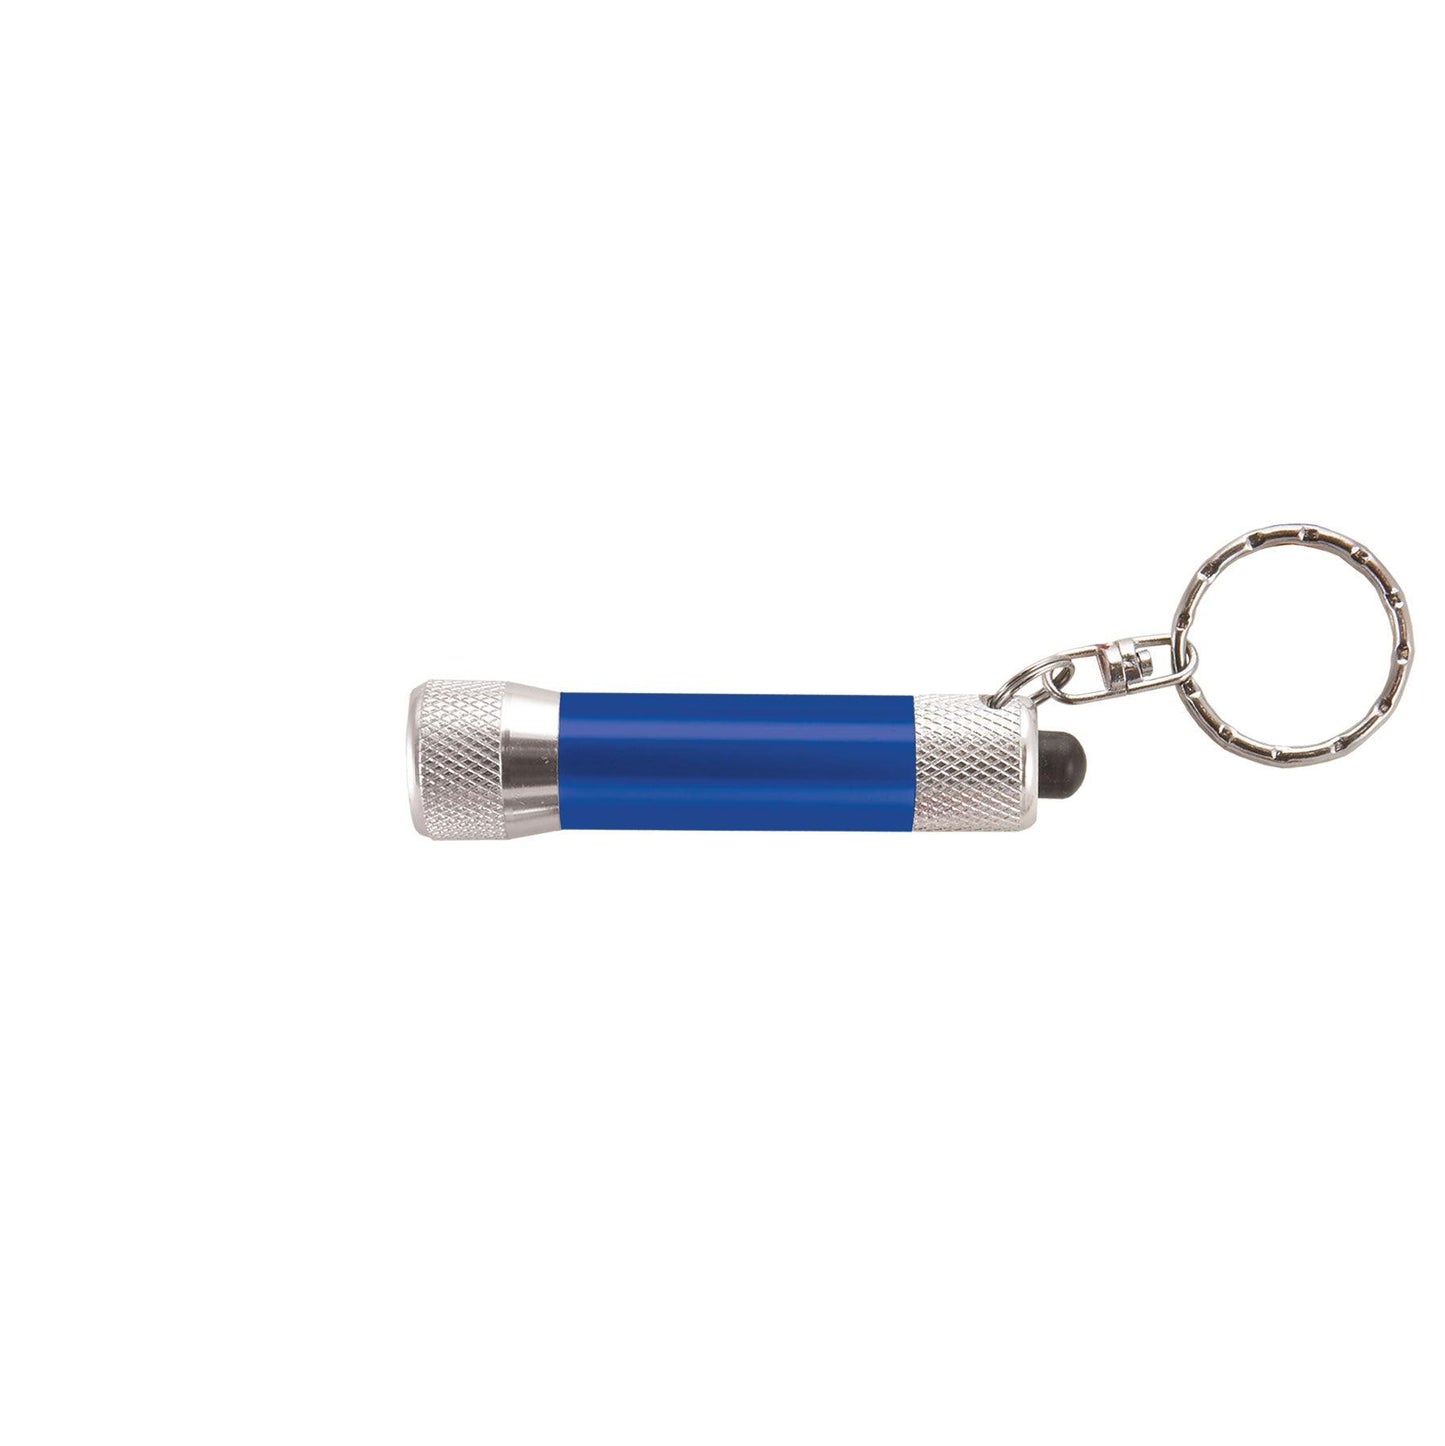 Blue Promotional Led keychain - Persopens Promotional Products LTD